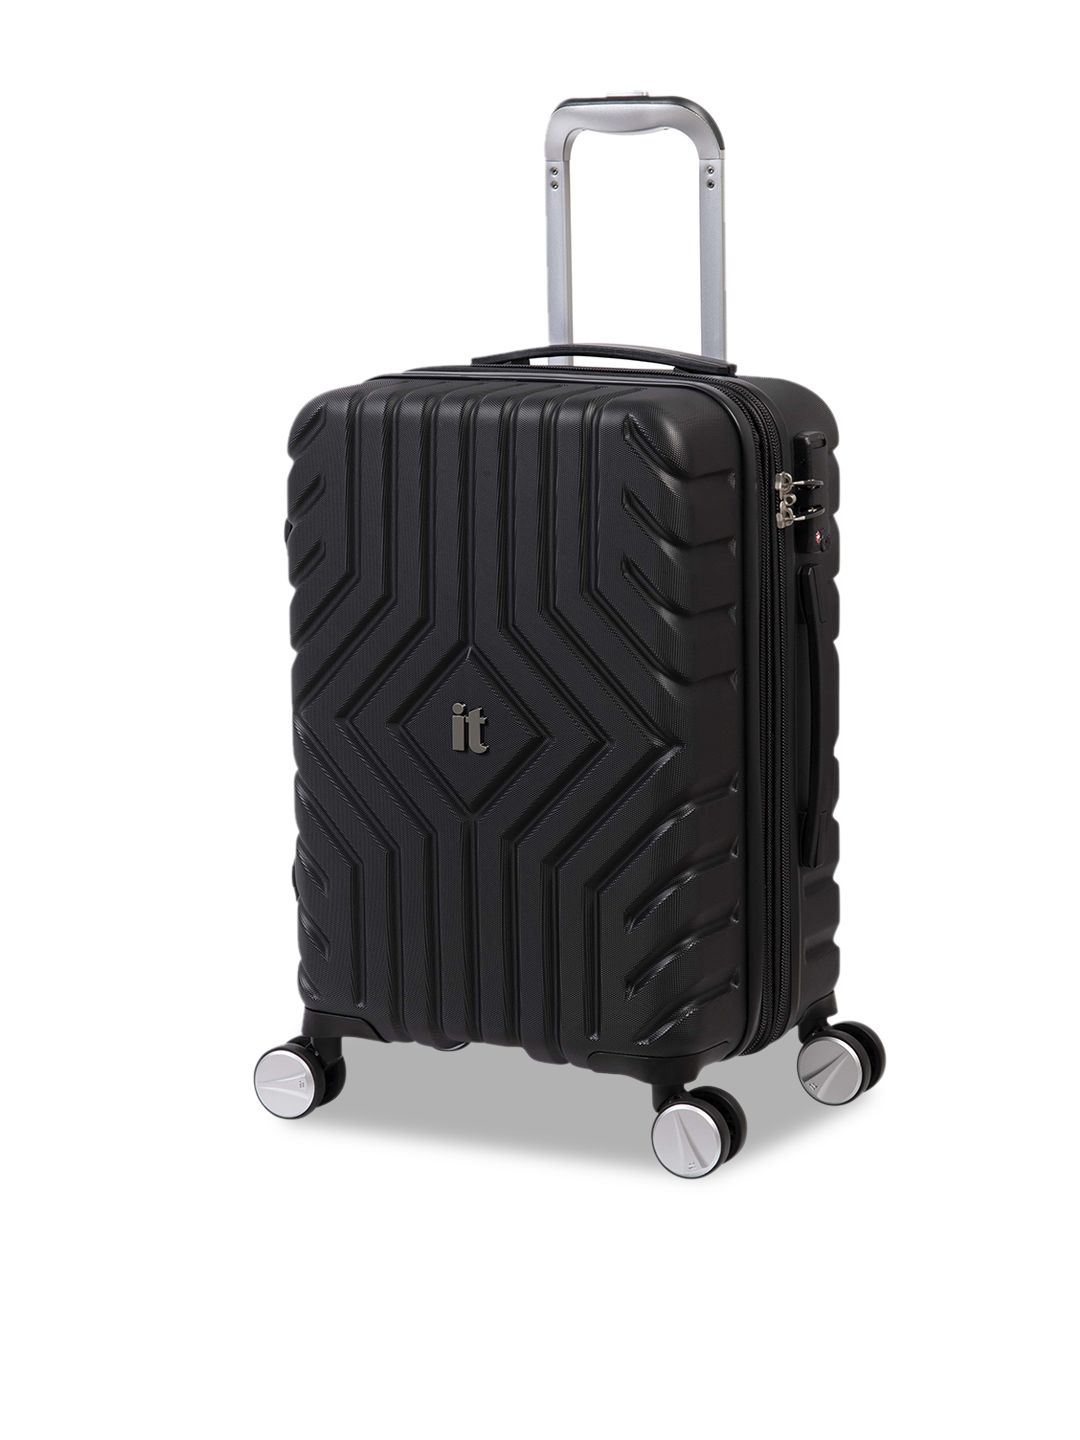 IT luggage Black  Solid Hard-Sided Small Trolley Bag Price in India